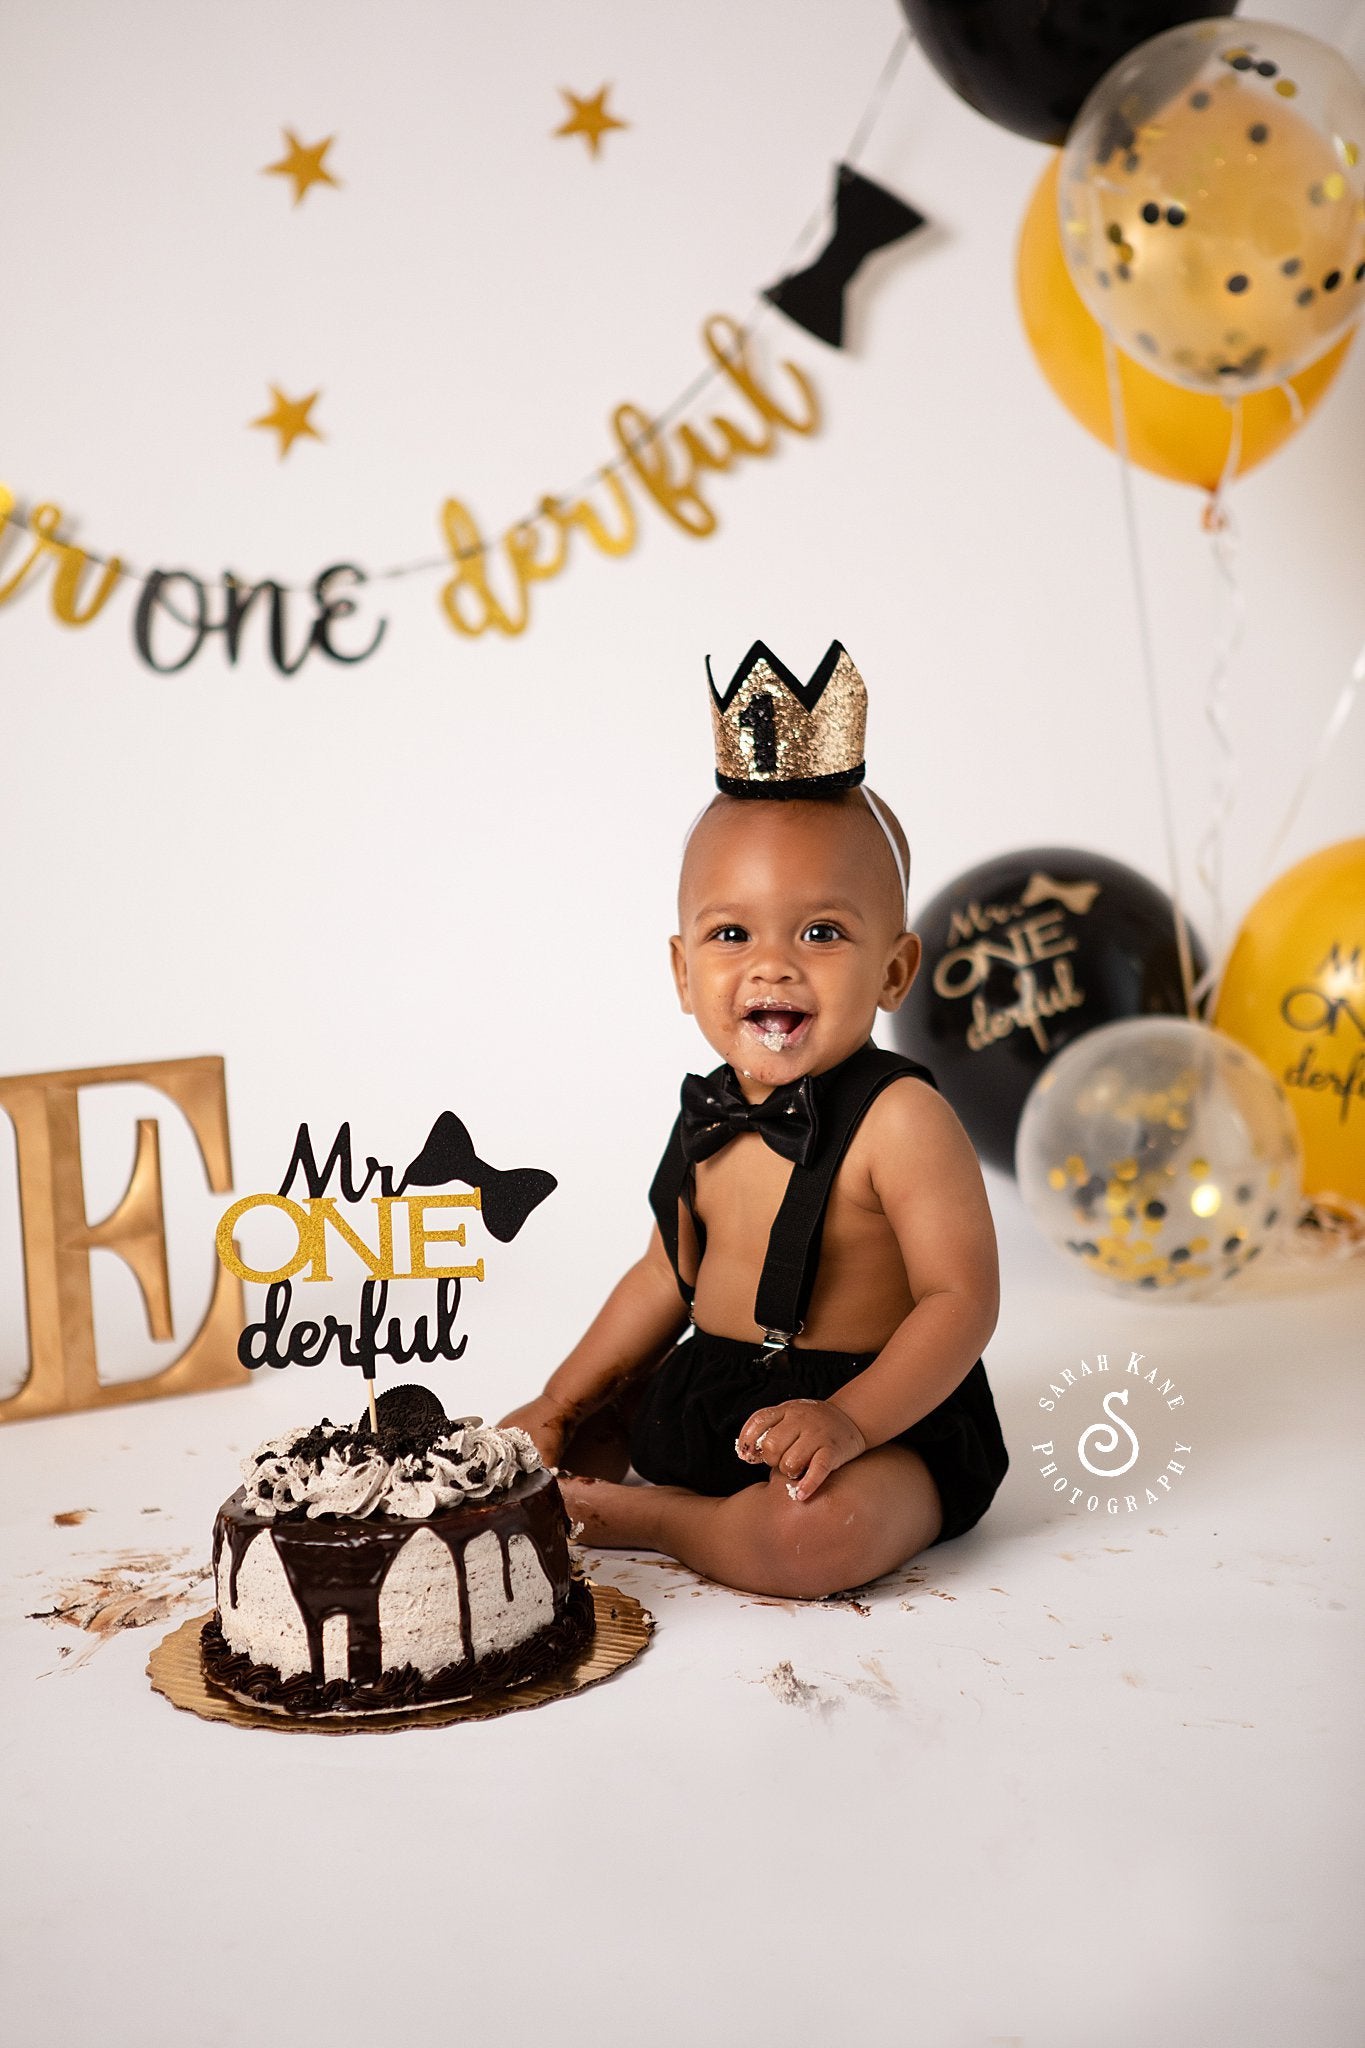 Black & Gold Smash the Cake Outfit